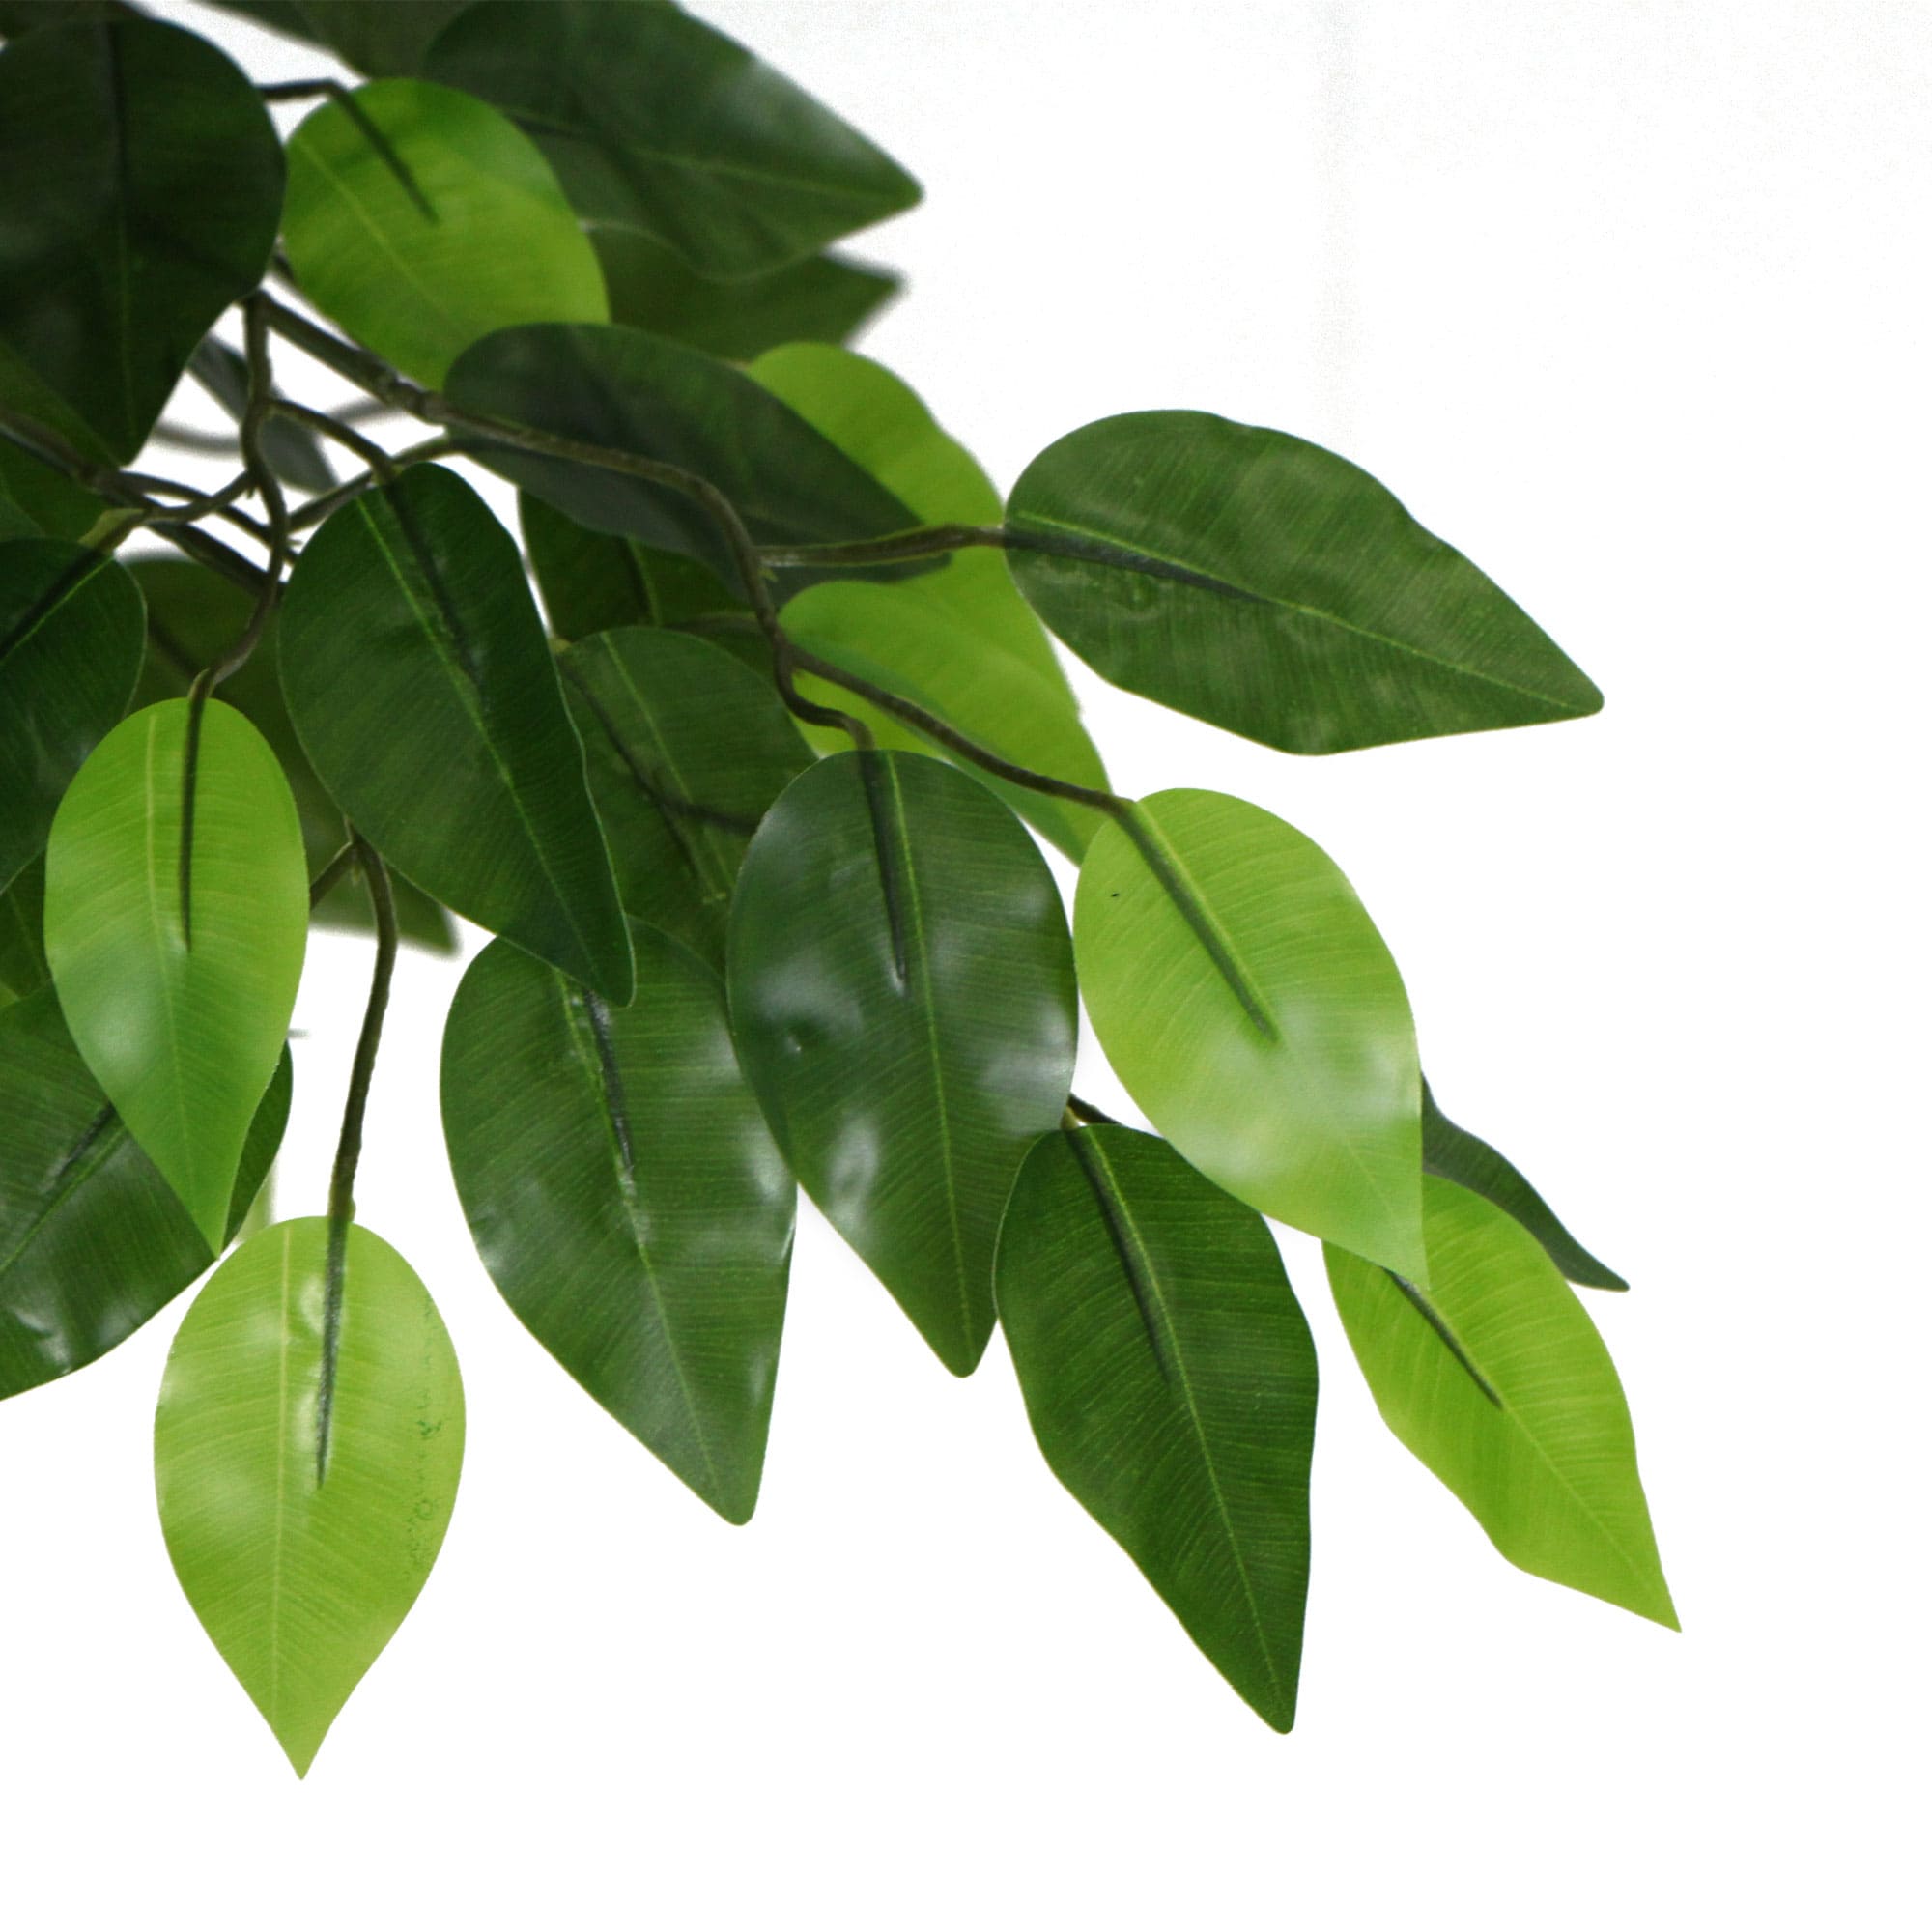 artificial-ficus-tree-180cm-nearly-natural-uv-resistant